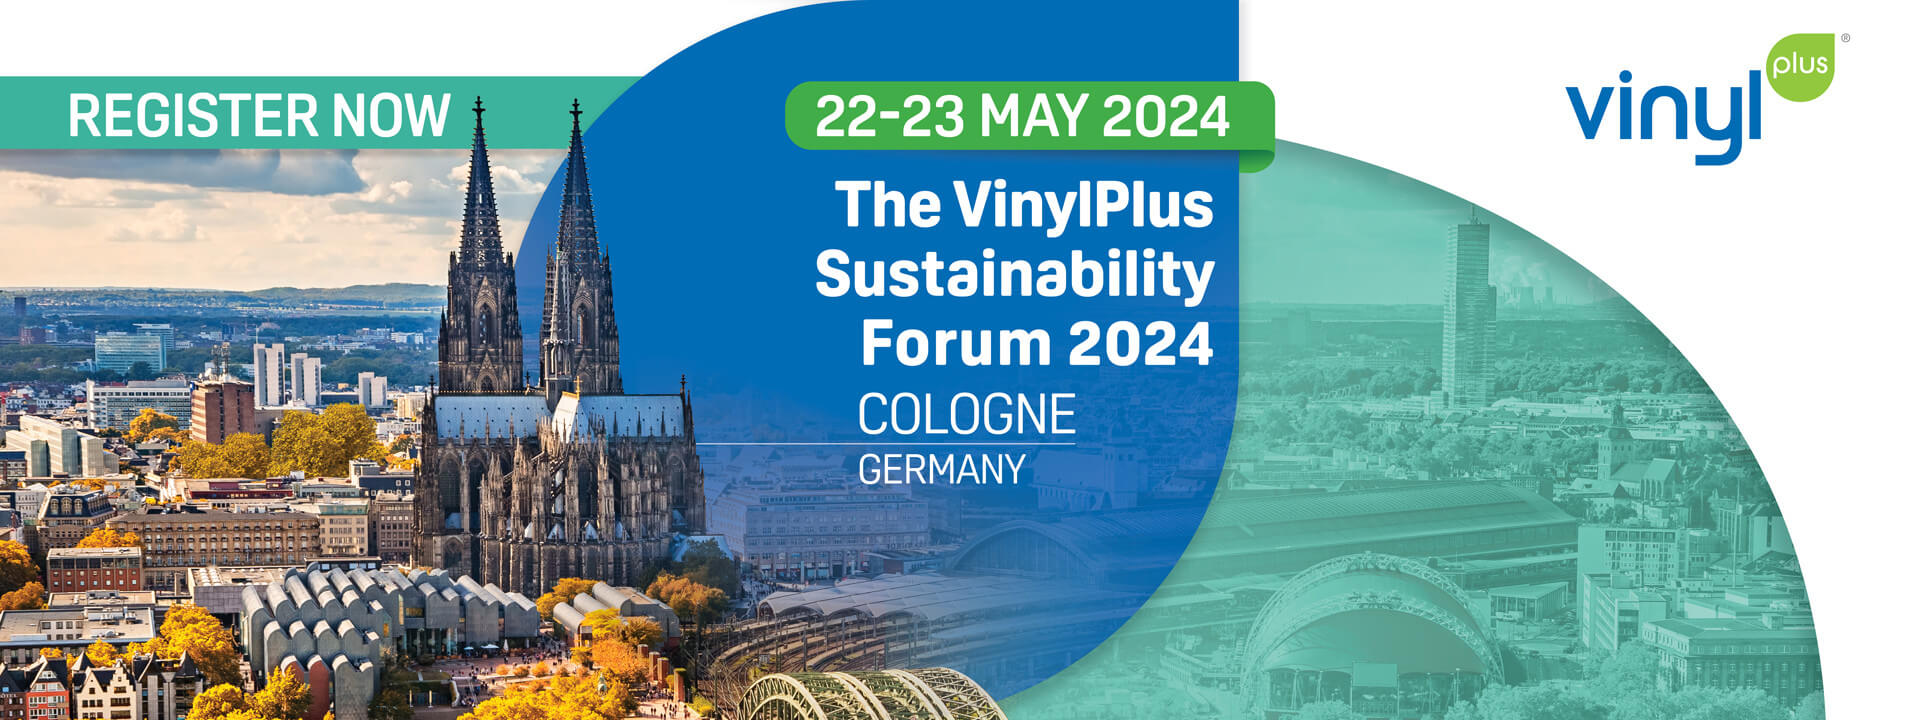 The VinylPlus Sustainability Forum 2024. Together towards higher ambitions